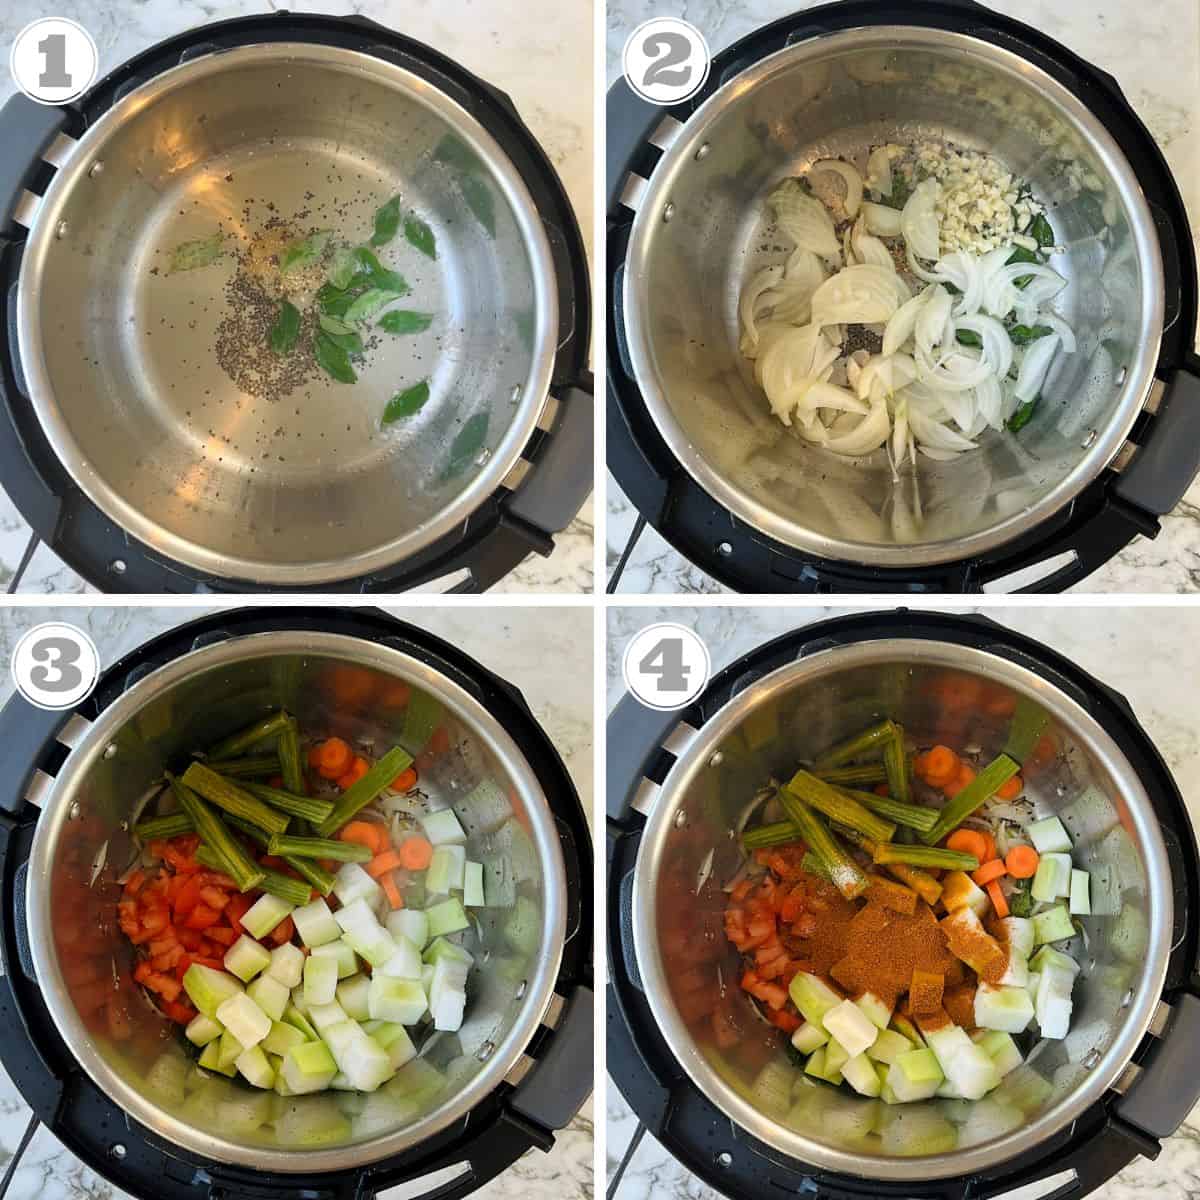 photos one through four showing tempering of spices and veggies sauteed in a pot 